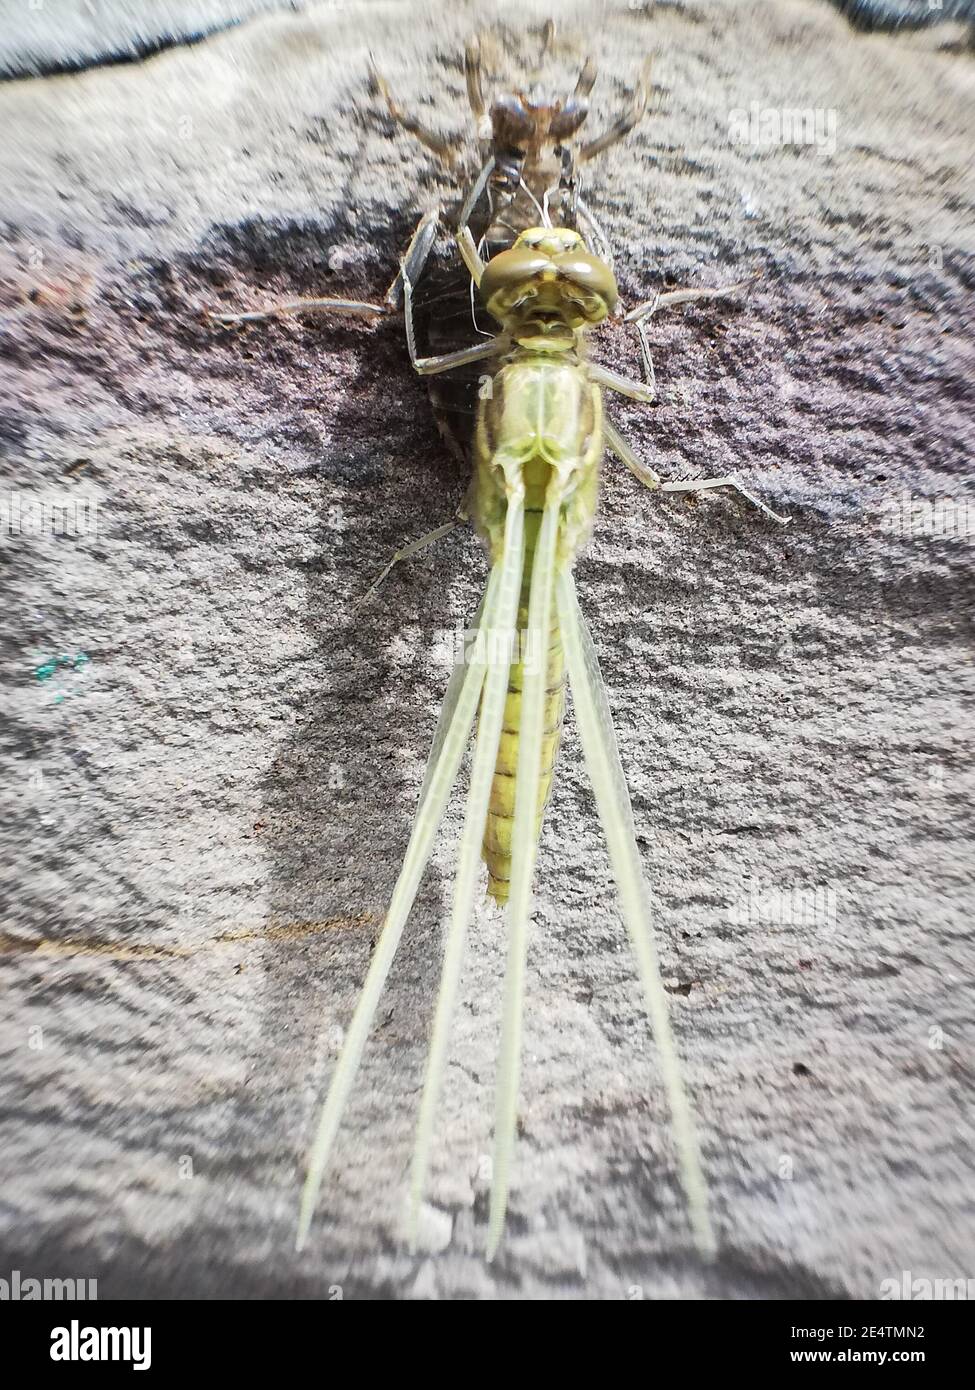 Birth of a dragonfly on the garden's wall. Insect in close-up. Dragonfly in macro Stock Photo